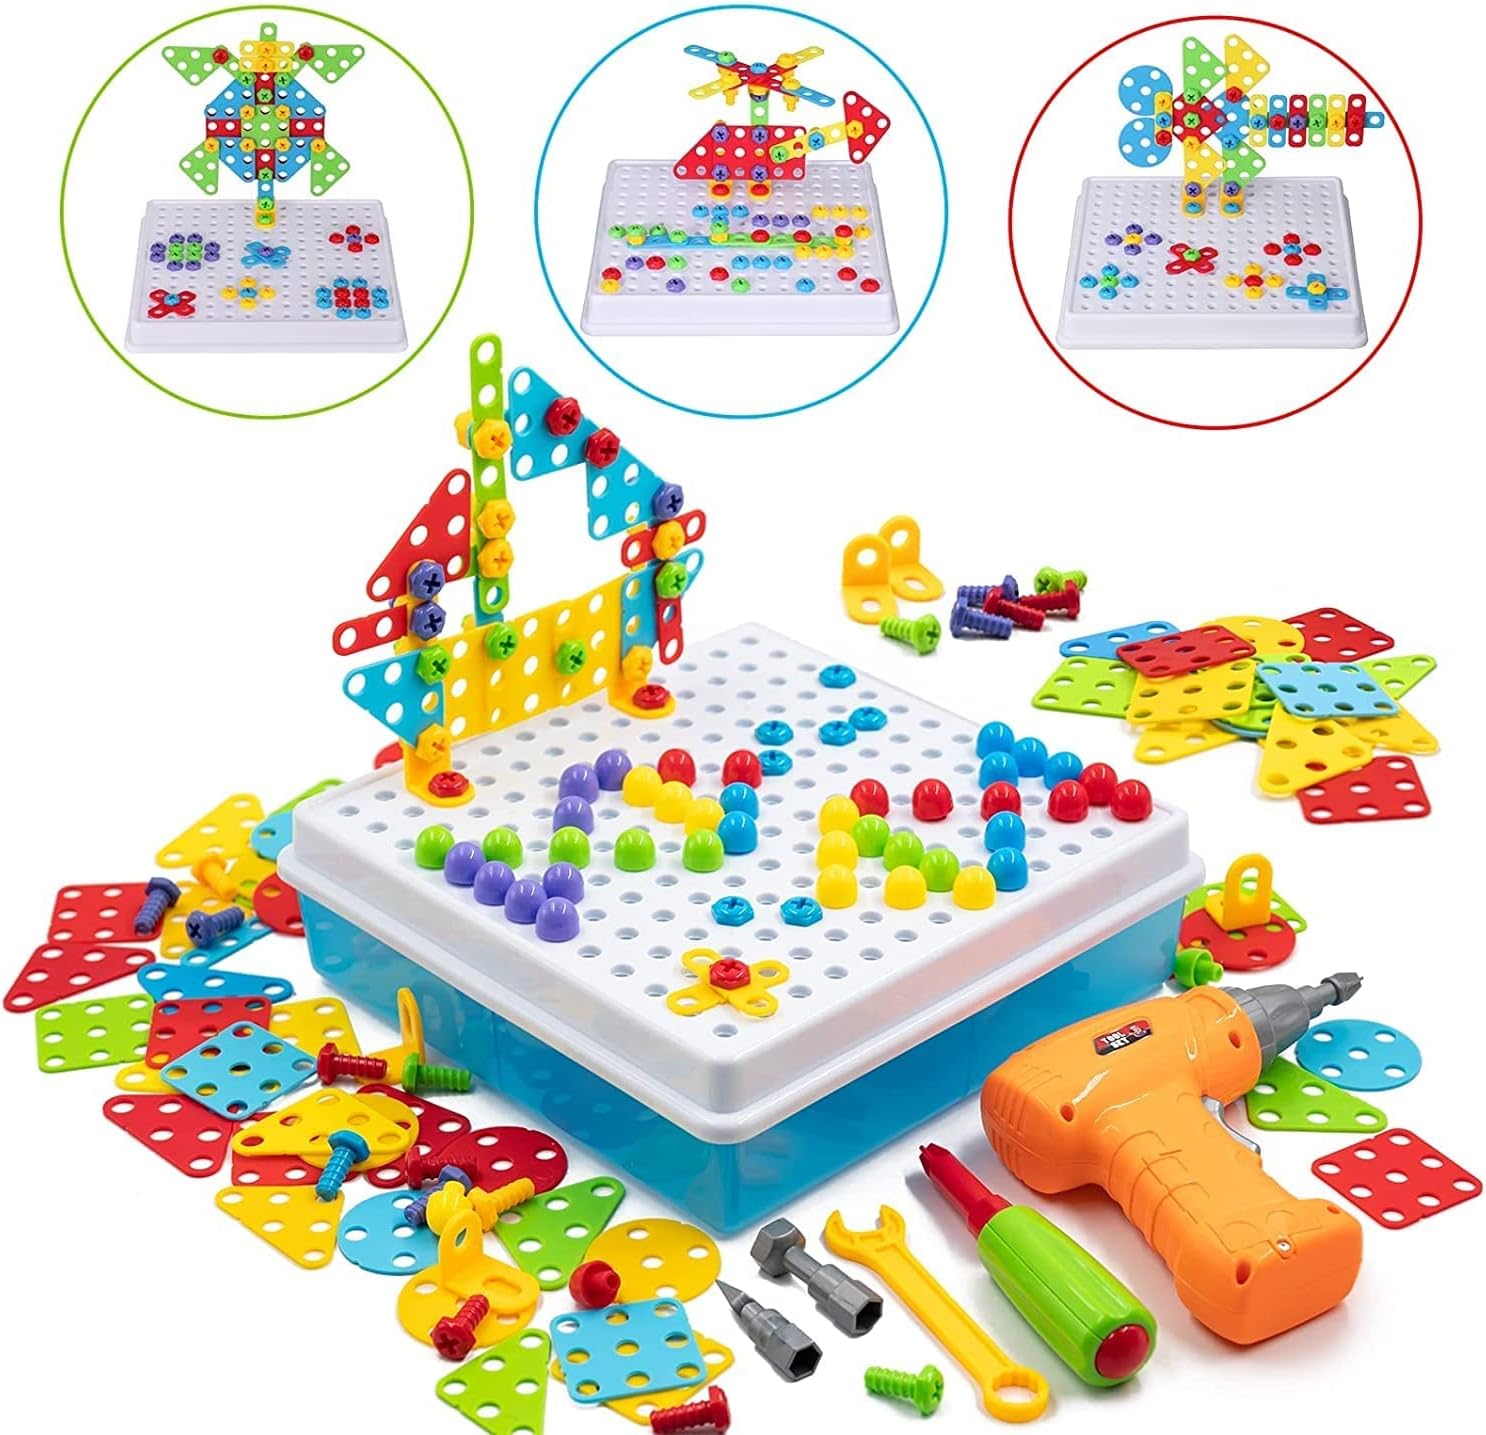 Arabest Drilling Toys, Creative Mosaic Drill Set for Kids 4-8 Years Old, Electric Drill and Screw Puzzle Set for Kids, Playhouse Building Toys for Girls and Boys